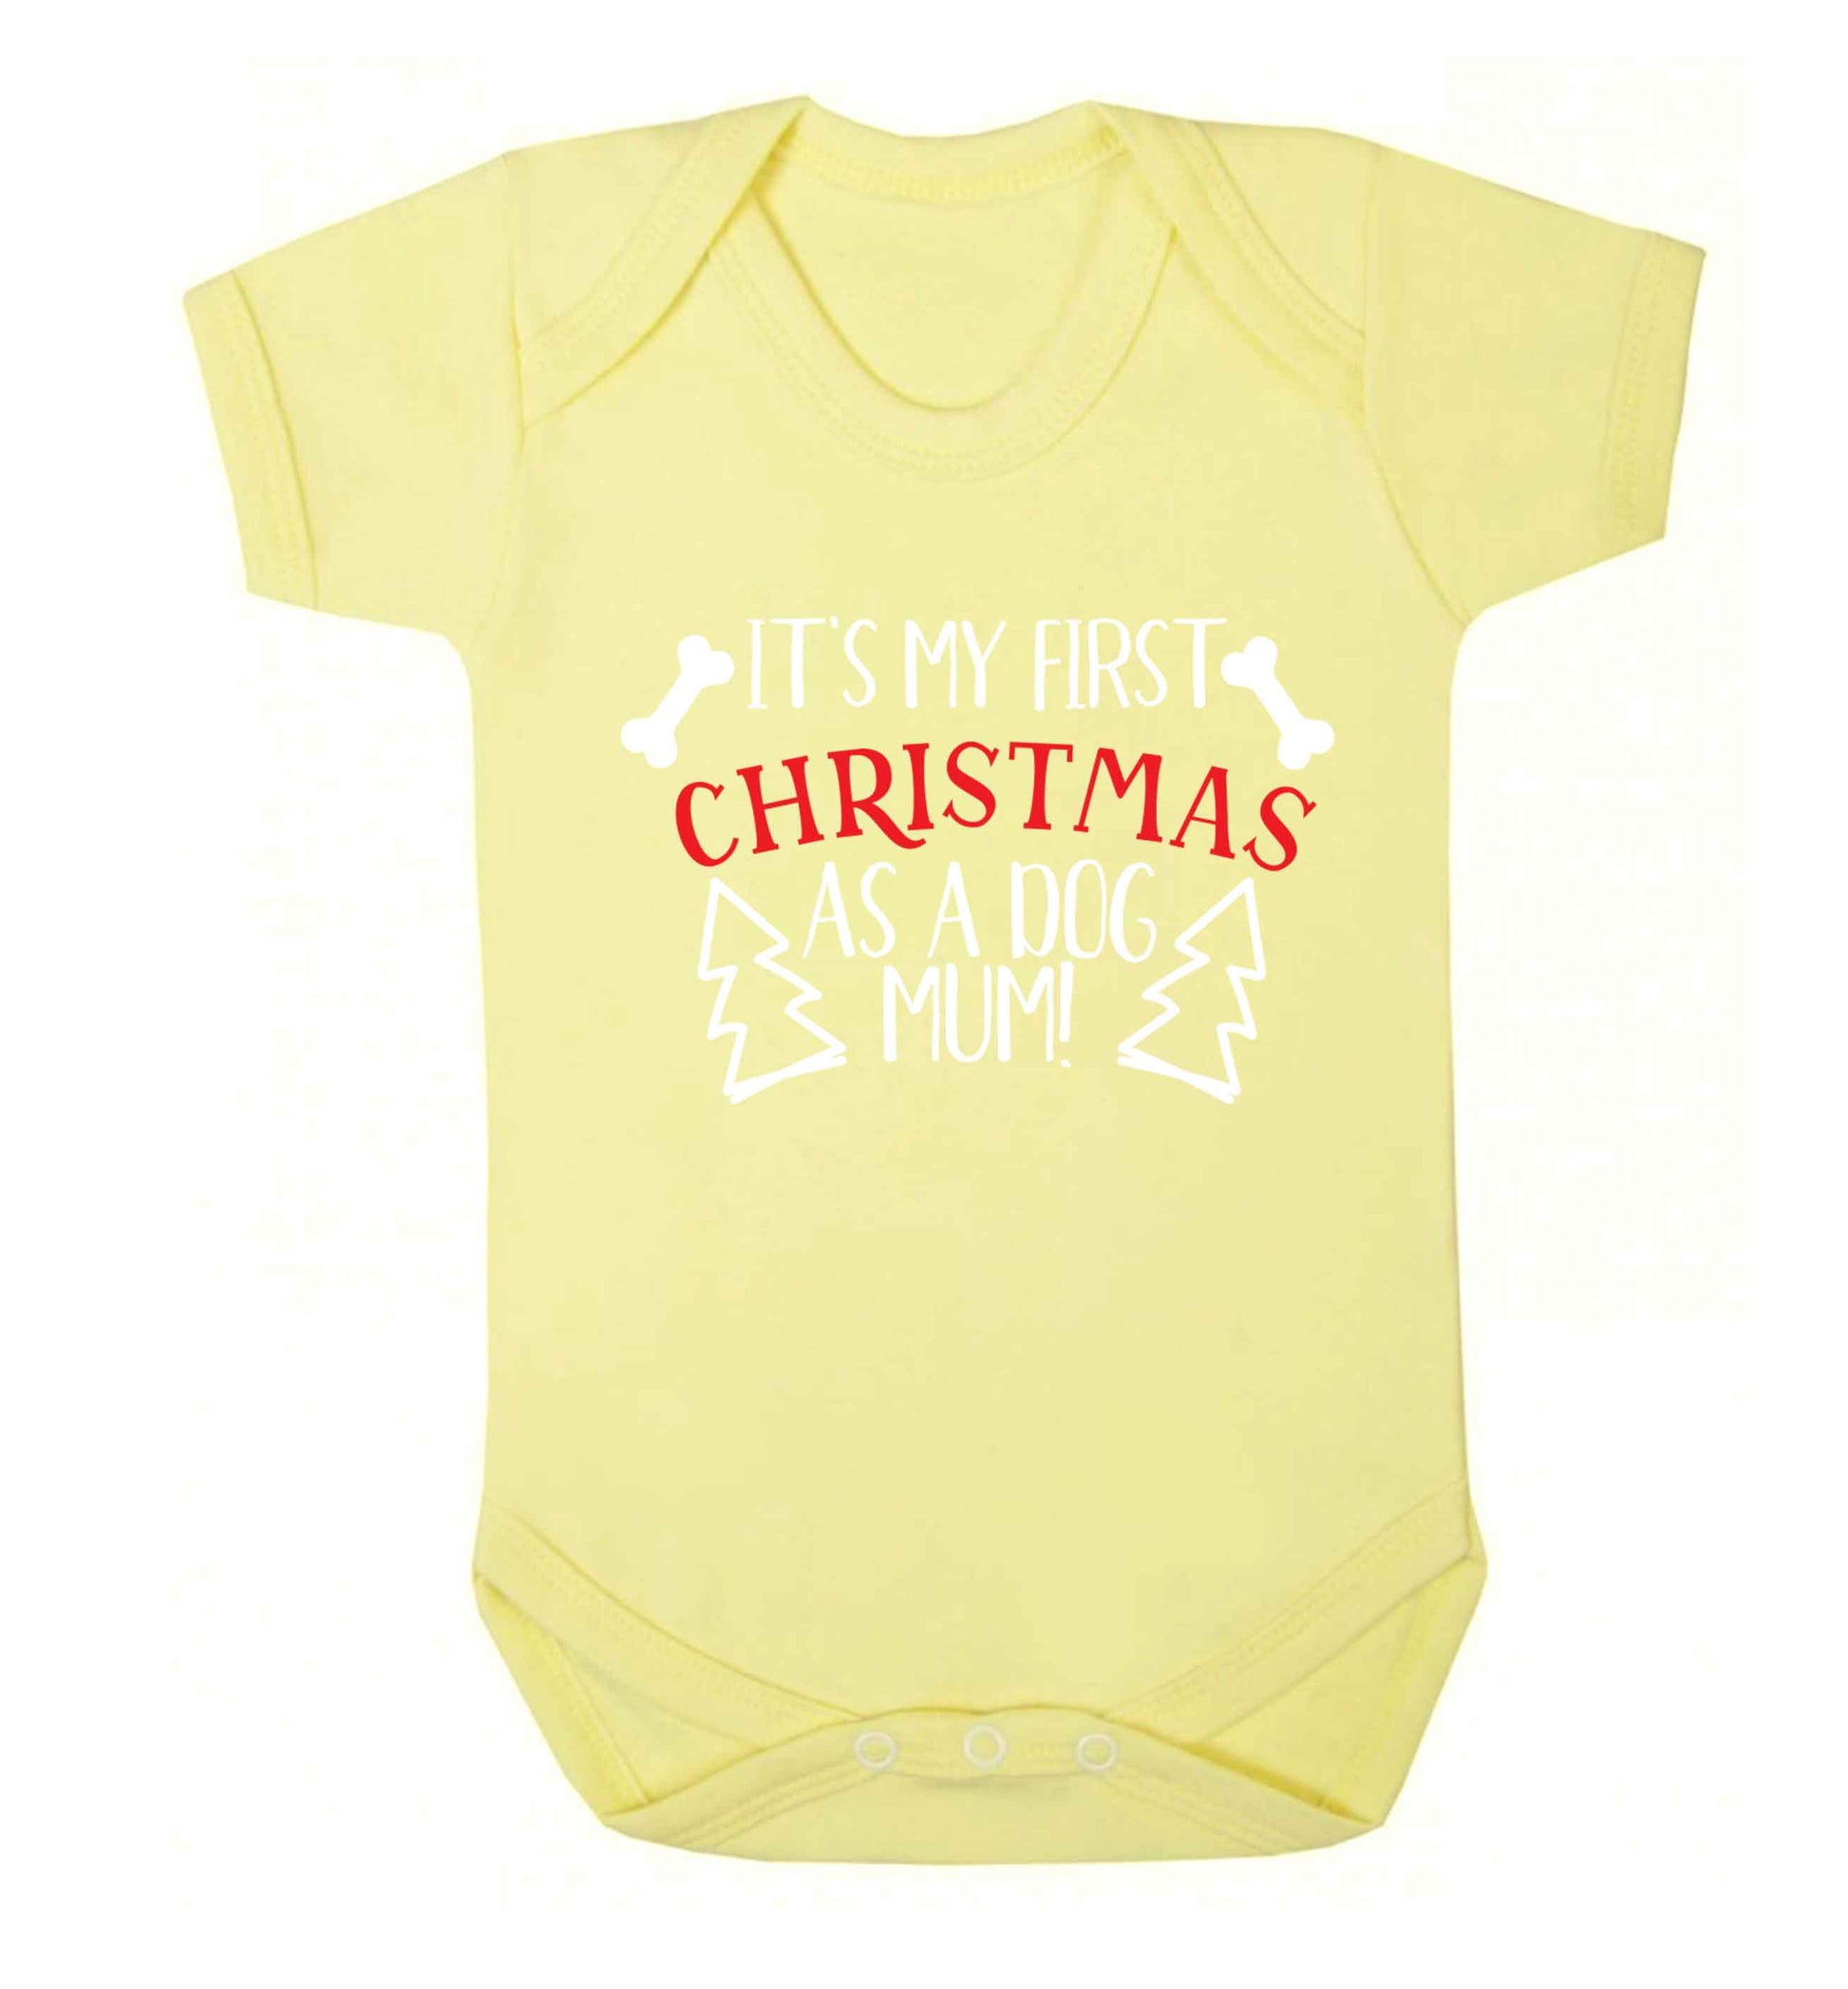 It's my first Christmas as a dog mum! Baby Vest pale yellow 18-24 months